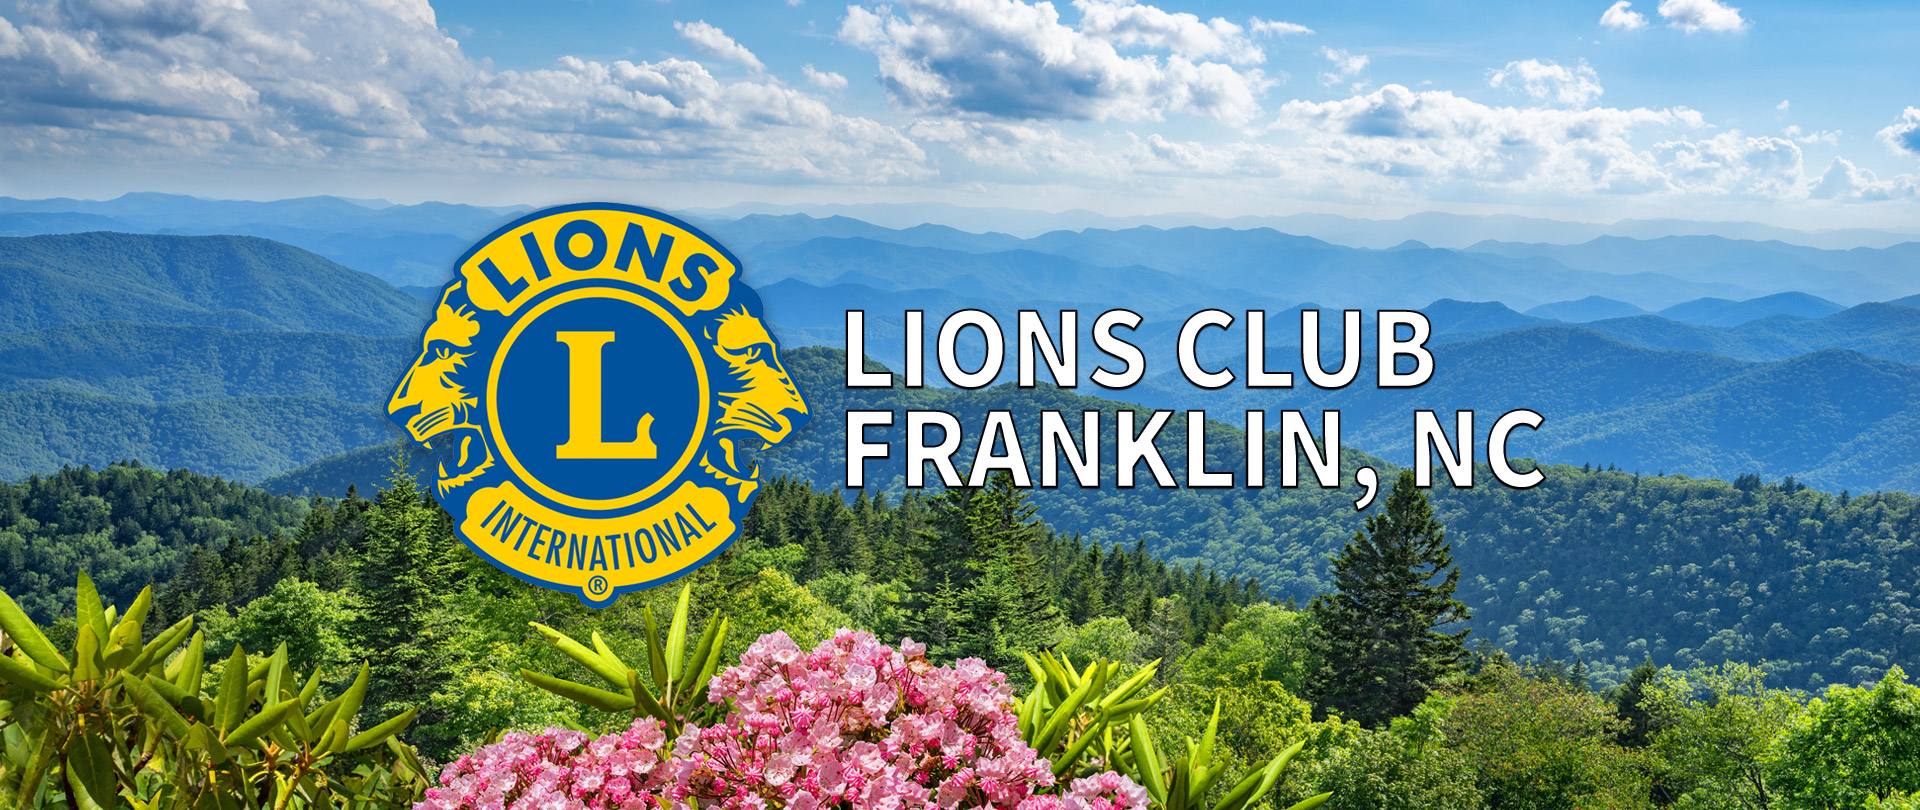 Franklin North Carolina Lions Club Members and Committees